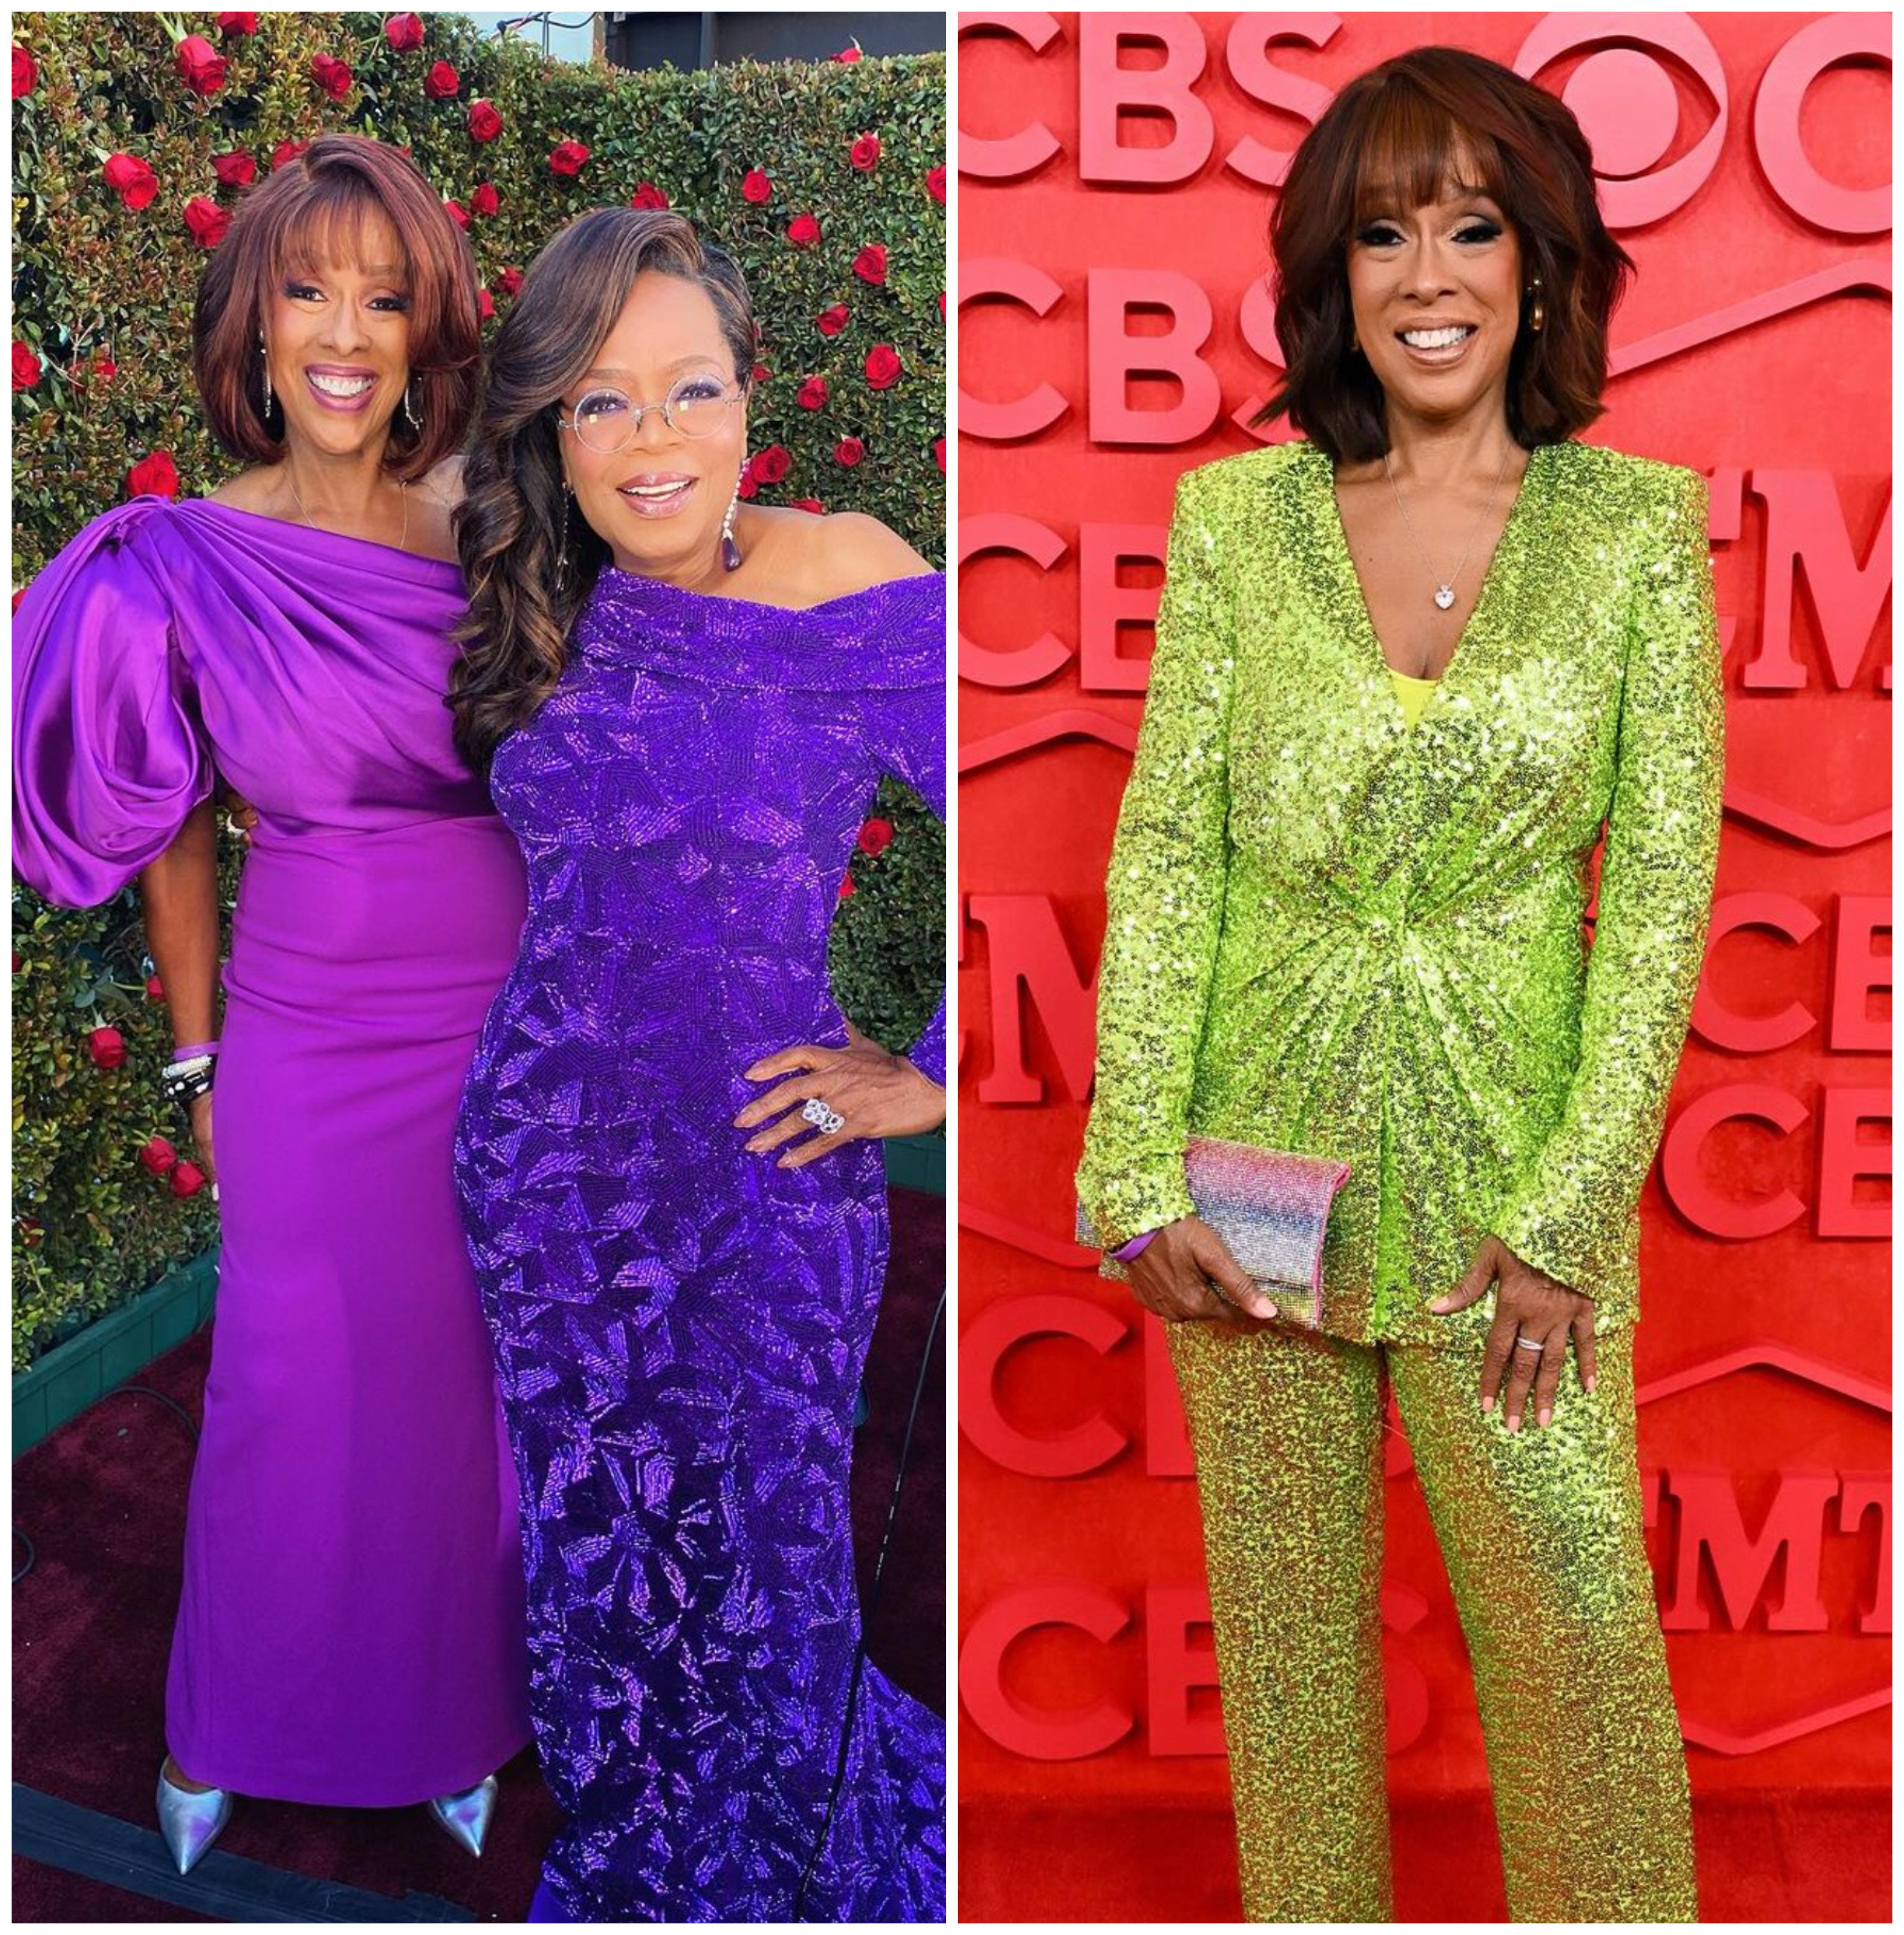 Gayle King is famously besties with Oprah Winfrey – and just did Sports Illustrated’s Swimsuit Edition cover. Photos: @gayleking/Instagram